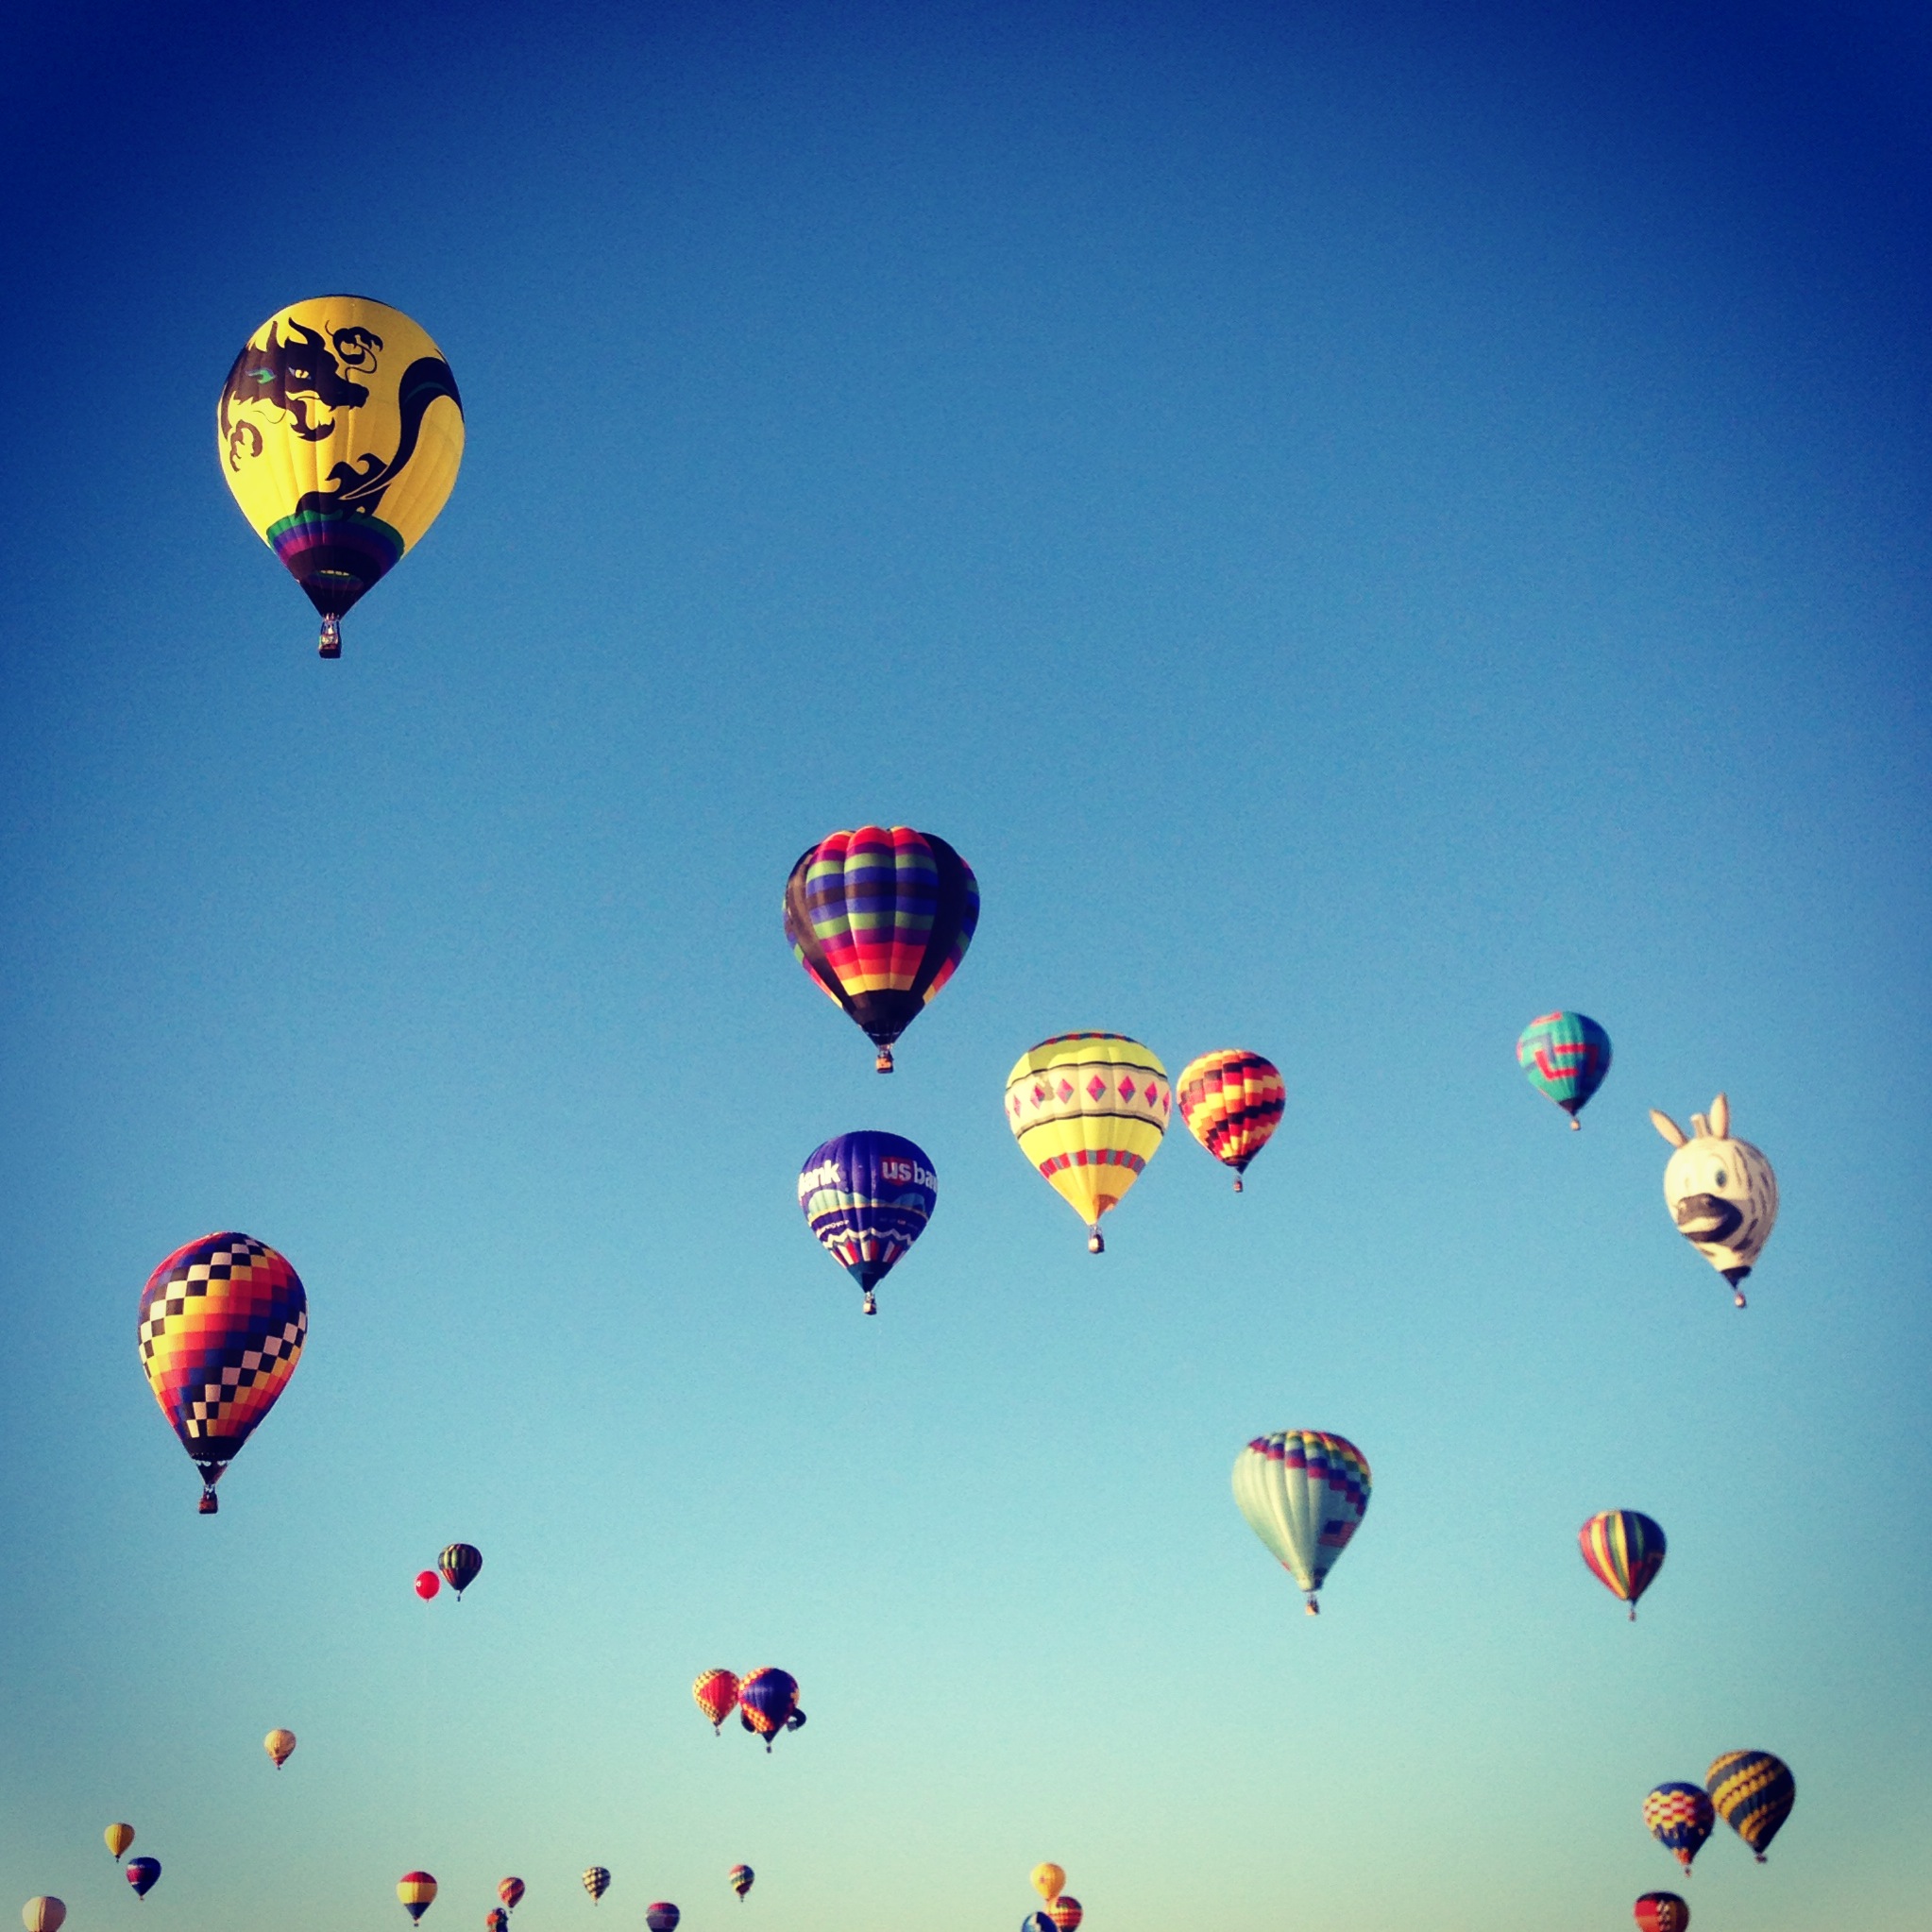 Since we're currently living in Albuquerque, we couldn't miss Balloon Fiesta. It didn't disappoint.